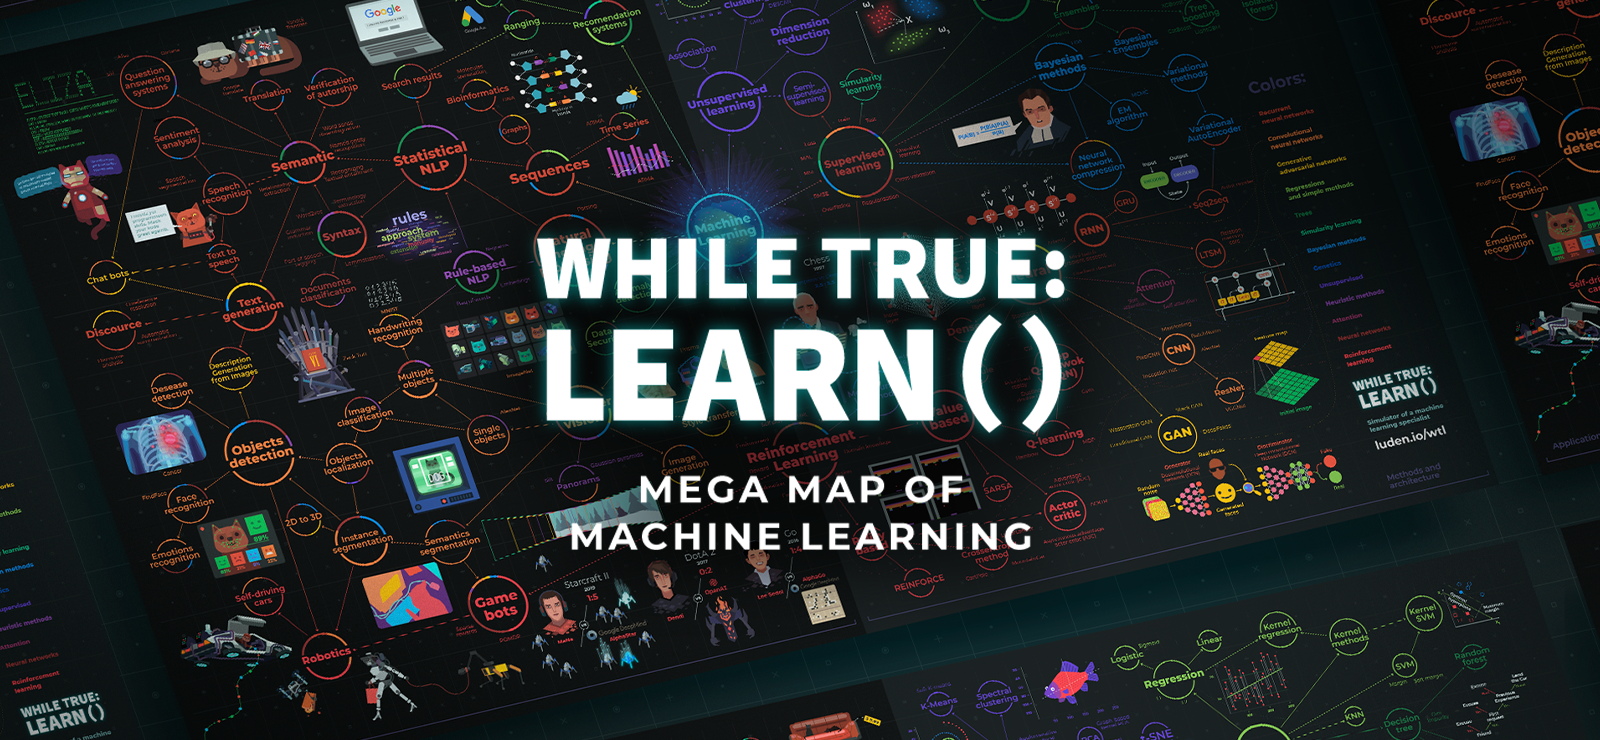 While True: Learn() Mega Map Of Machine Learning